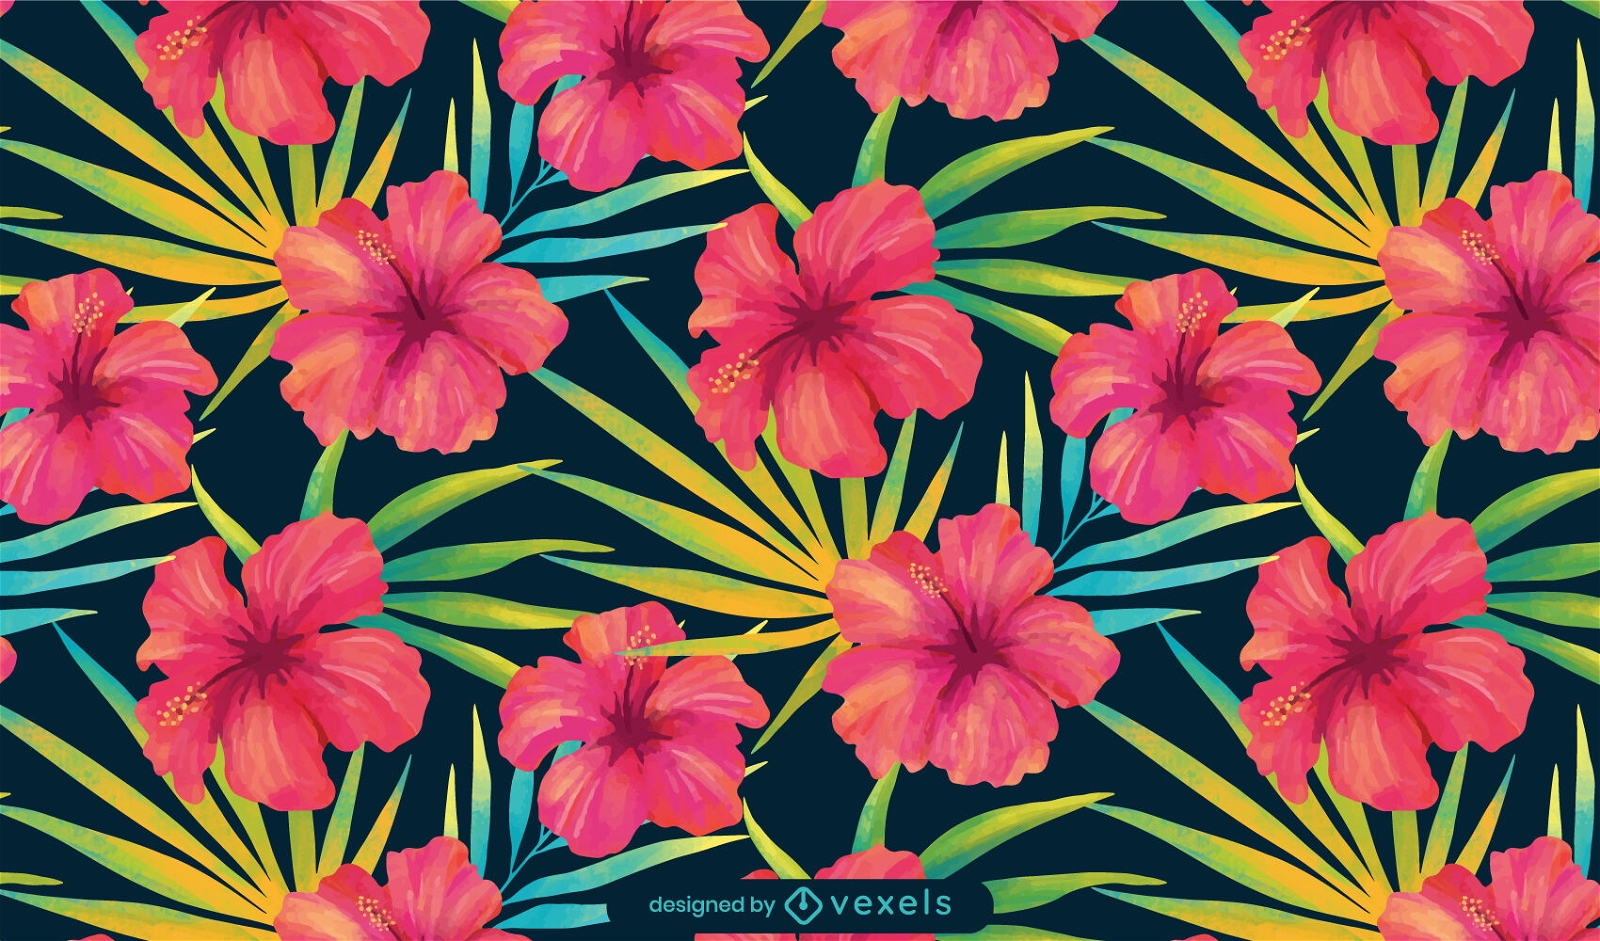 Tropical flowers nature pattern design